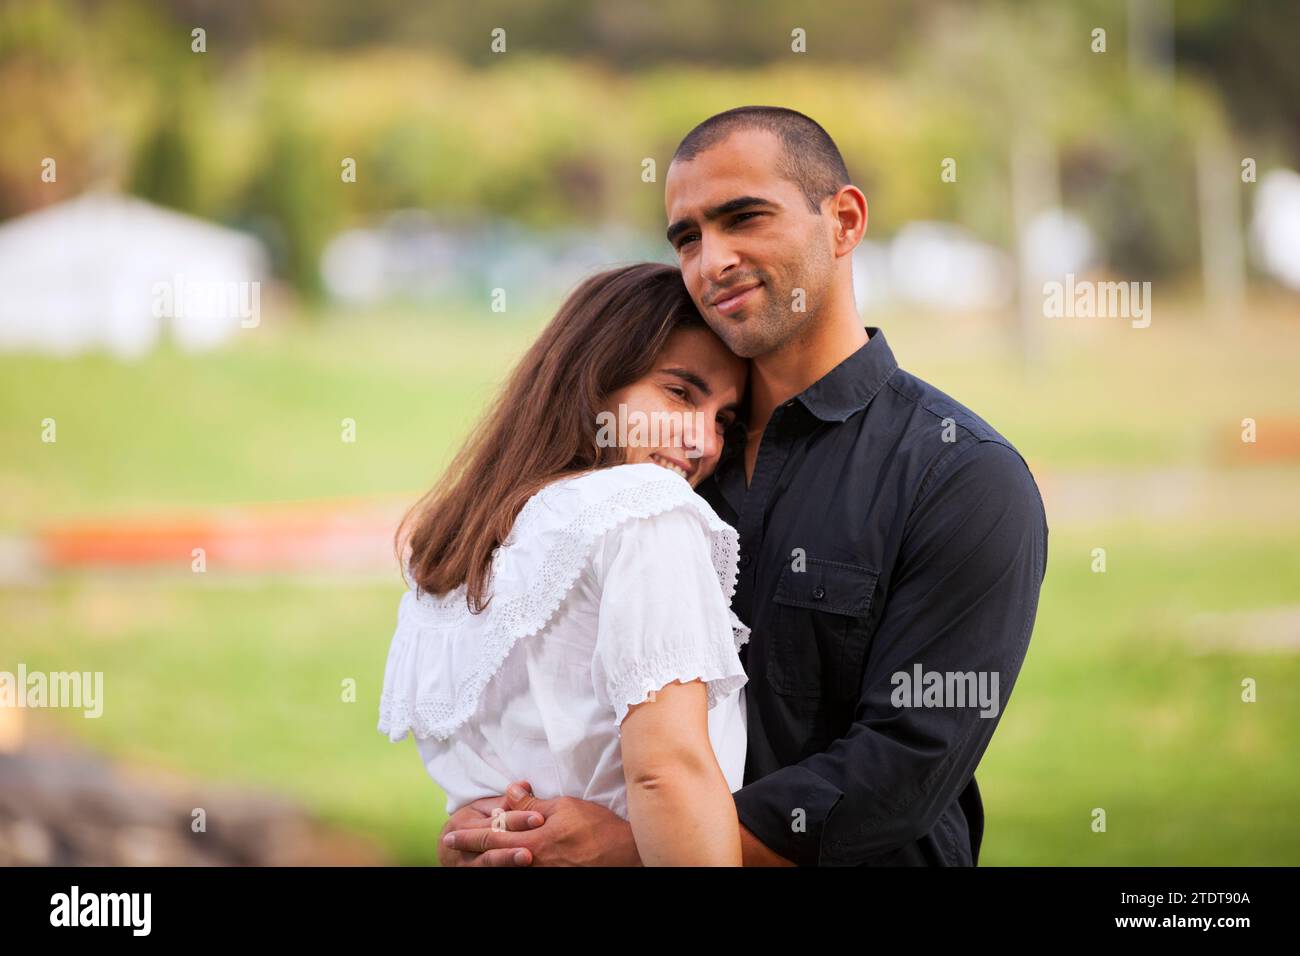 Passionate couple dating at the park Stock Photo